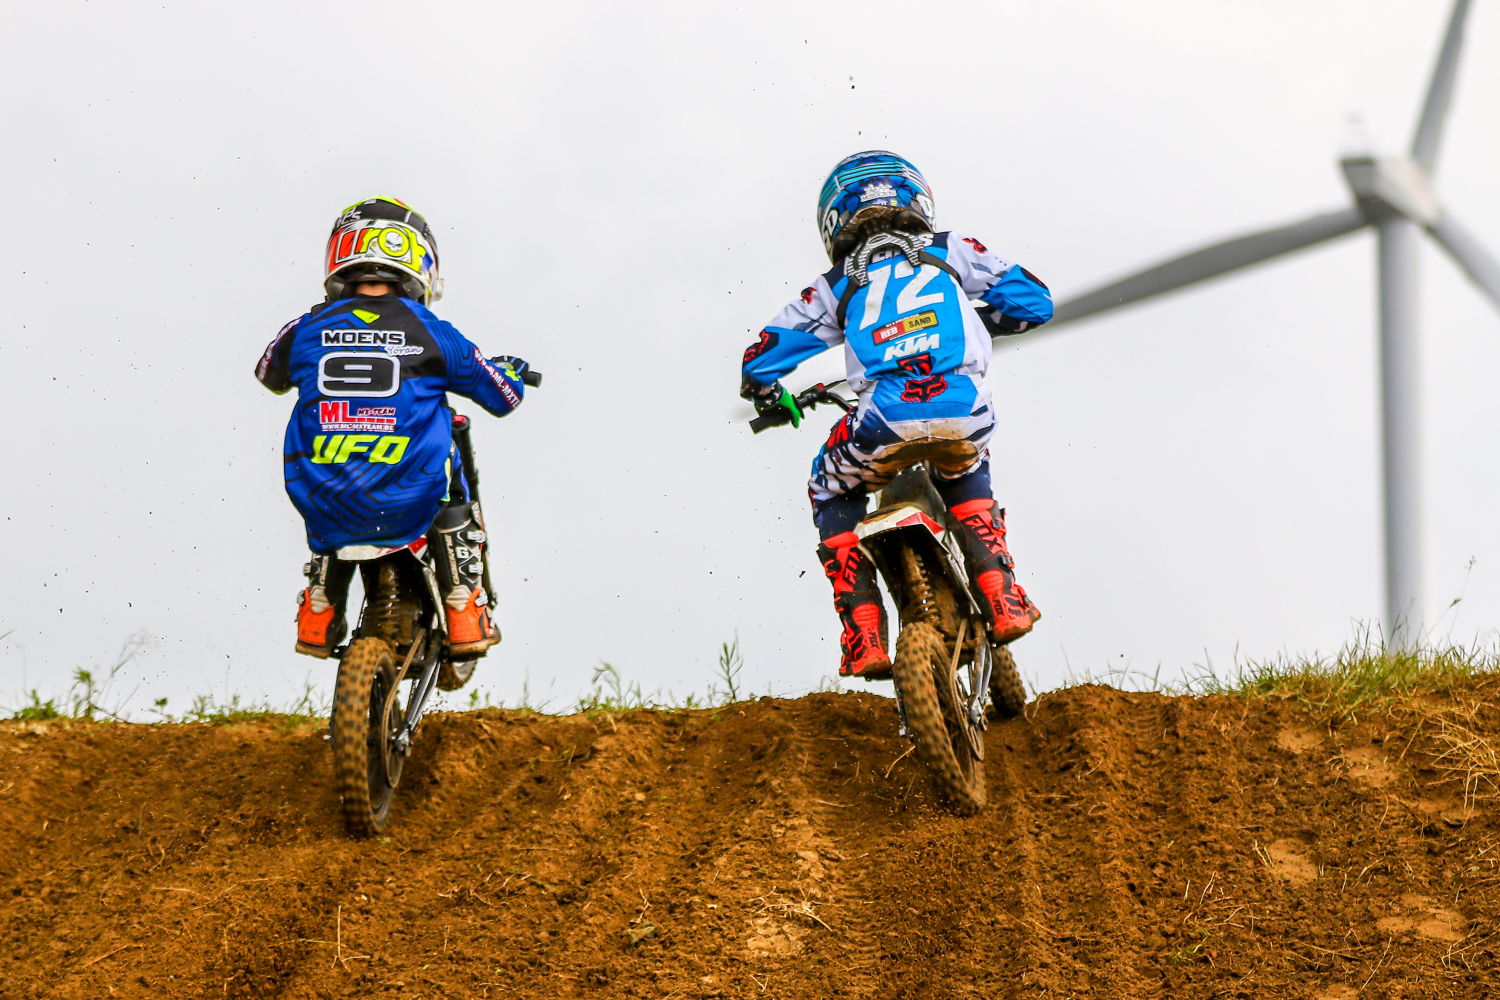 Yoran Moens (left) and Liam Everts (right), credit: Gino Maes